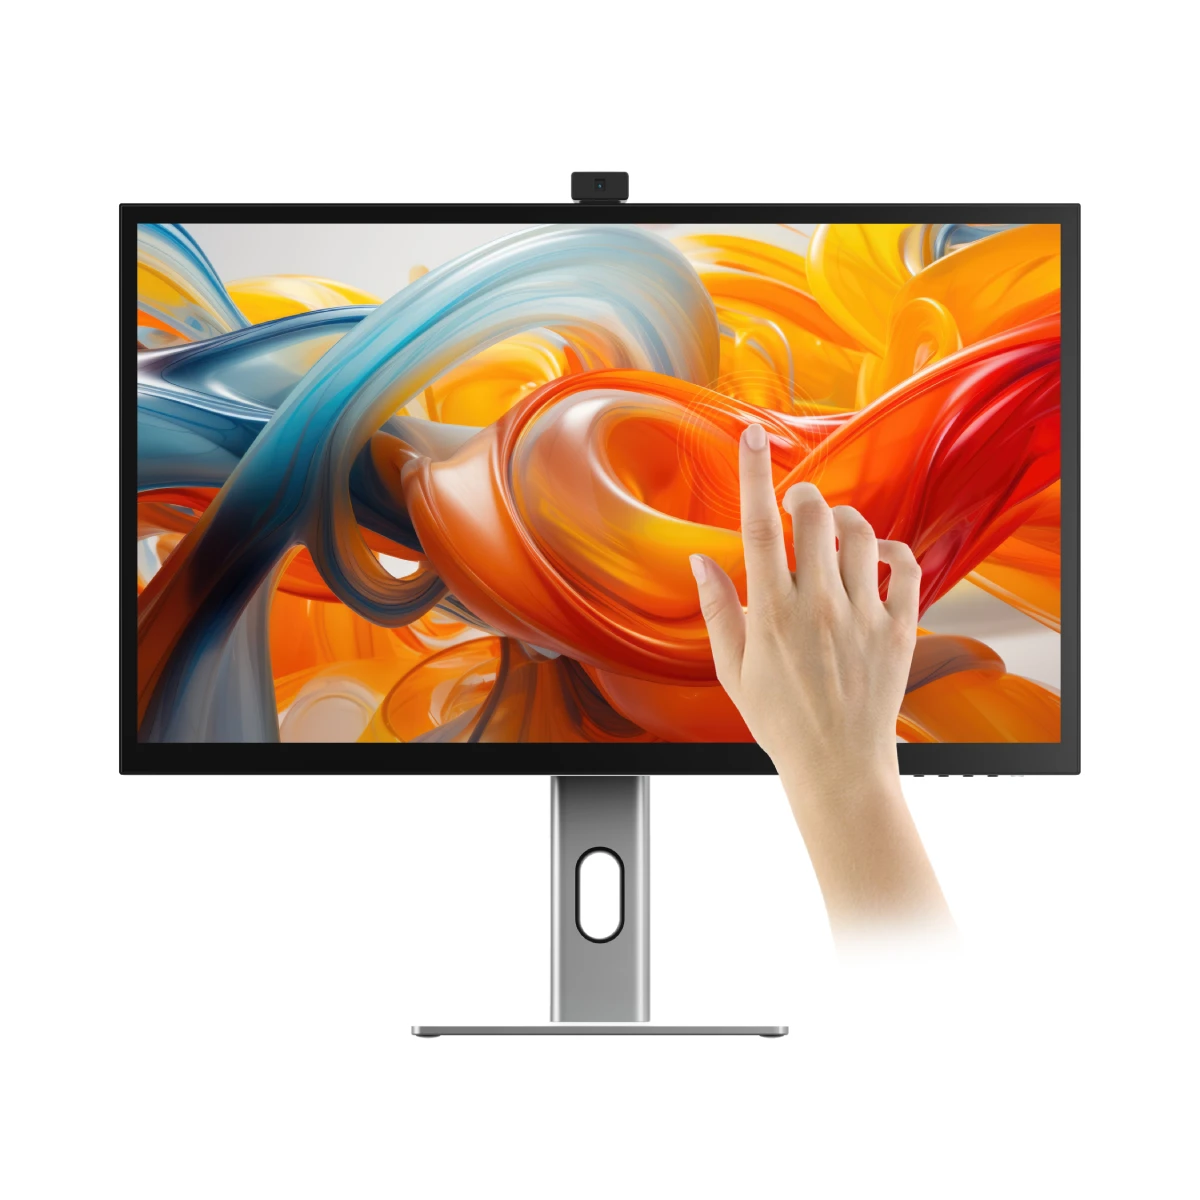 clarity-pro-touch-27-uhd-4k-monitor-with-65w-pd-webcam-and-touchscreen-dual-4k-universal-docking-station-hdmi-edition_7